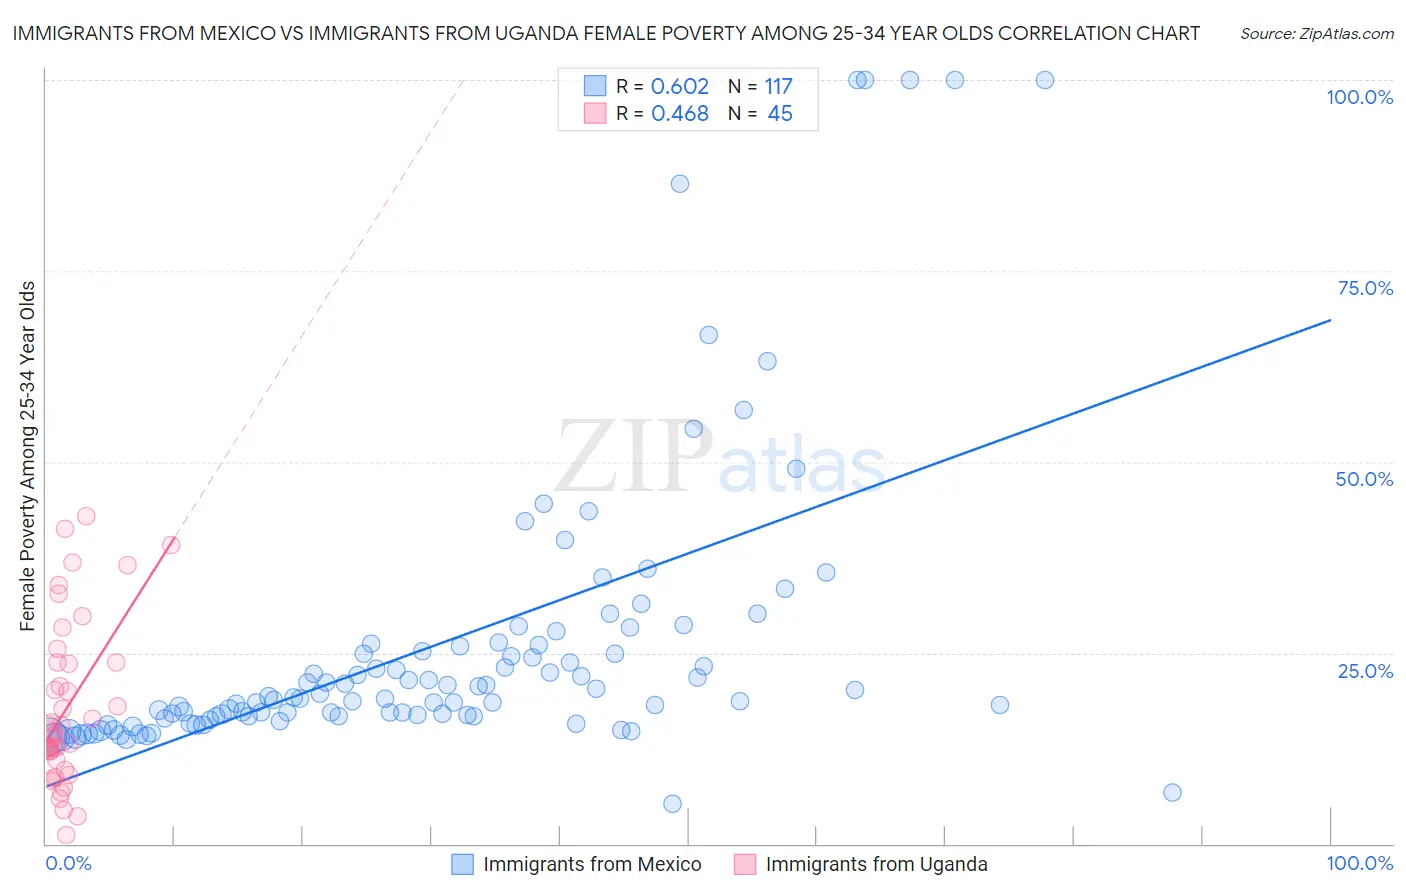 Immigrants from Mexico vs Immigrants from Uganda Female Poverty Among 25-34 Year Olds